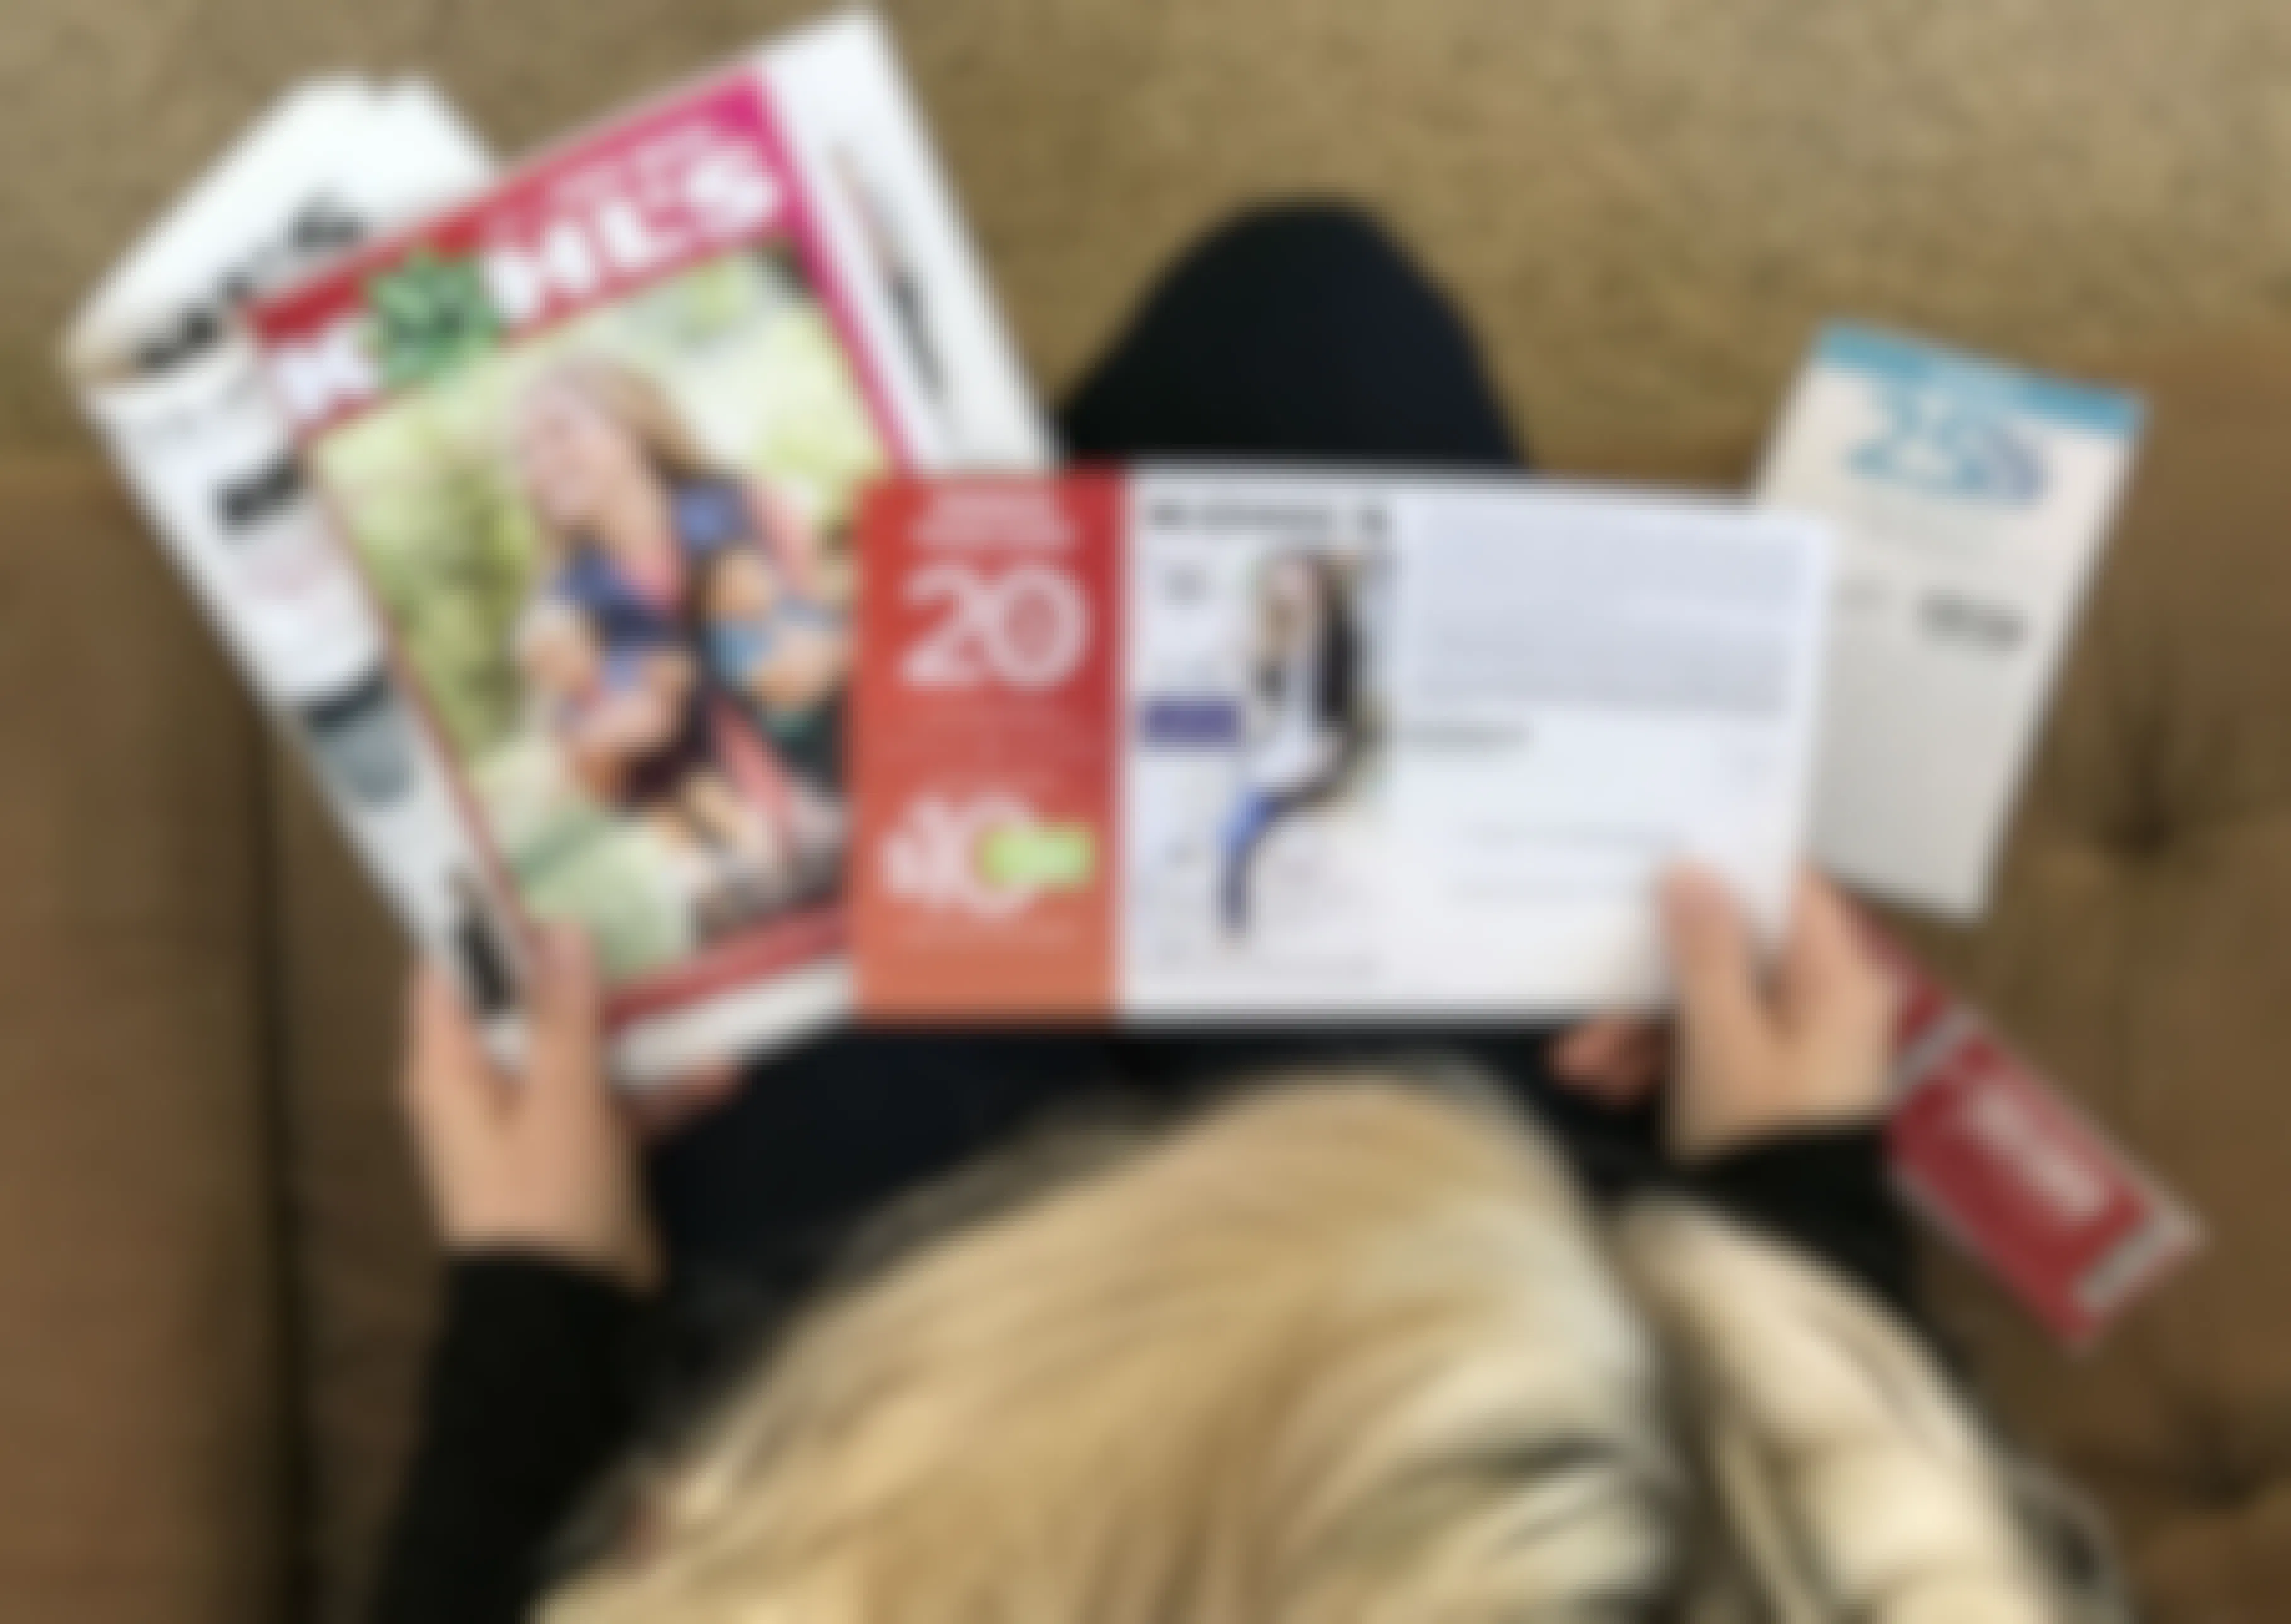 A person sitting on a couch, looking at some Kohl's coupons and an ad.